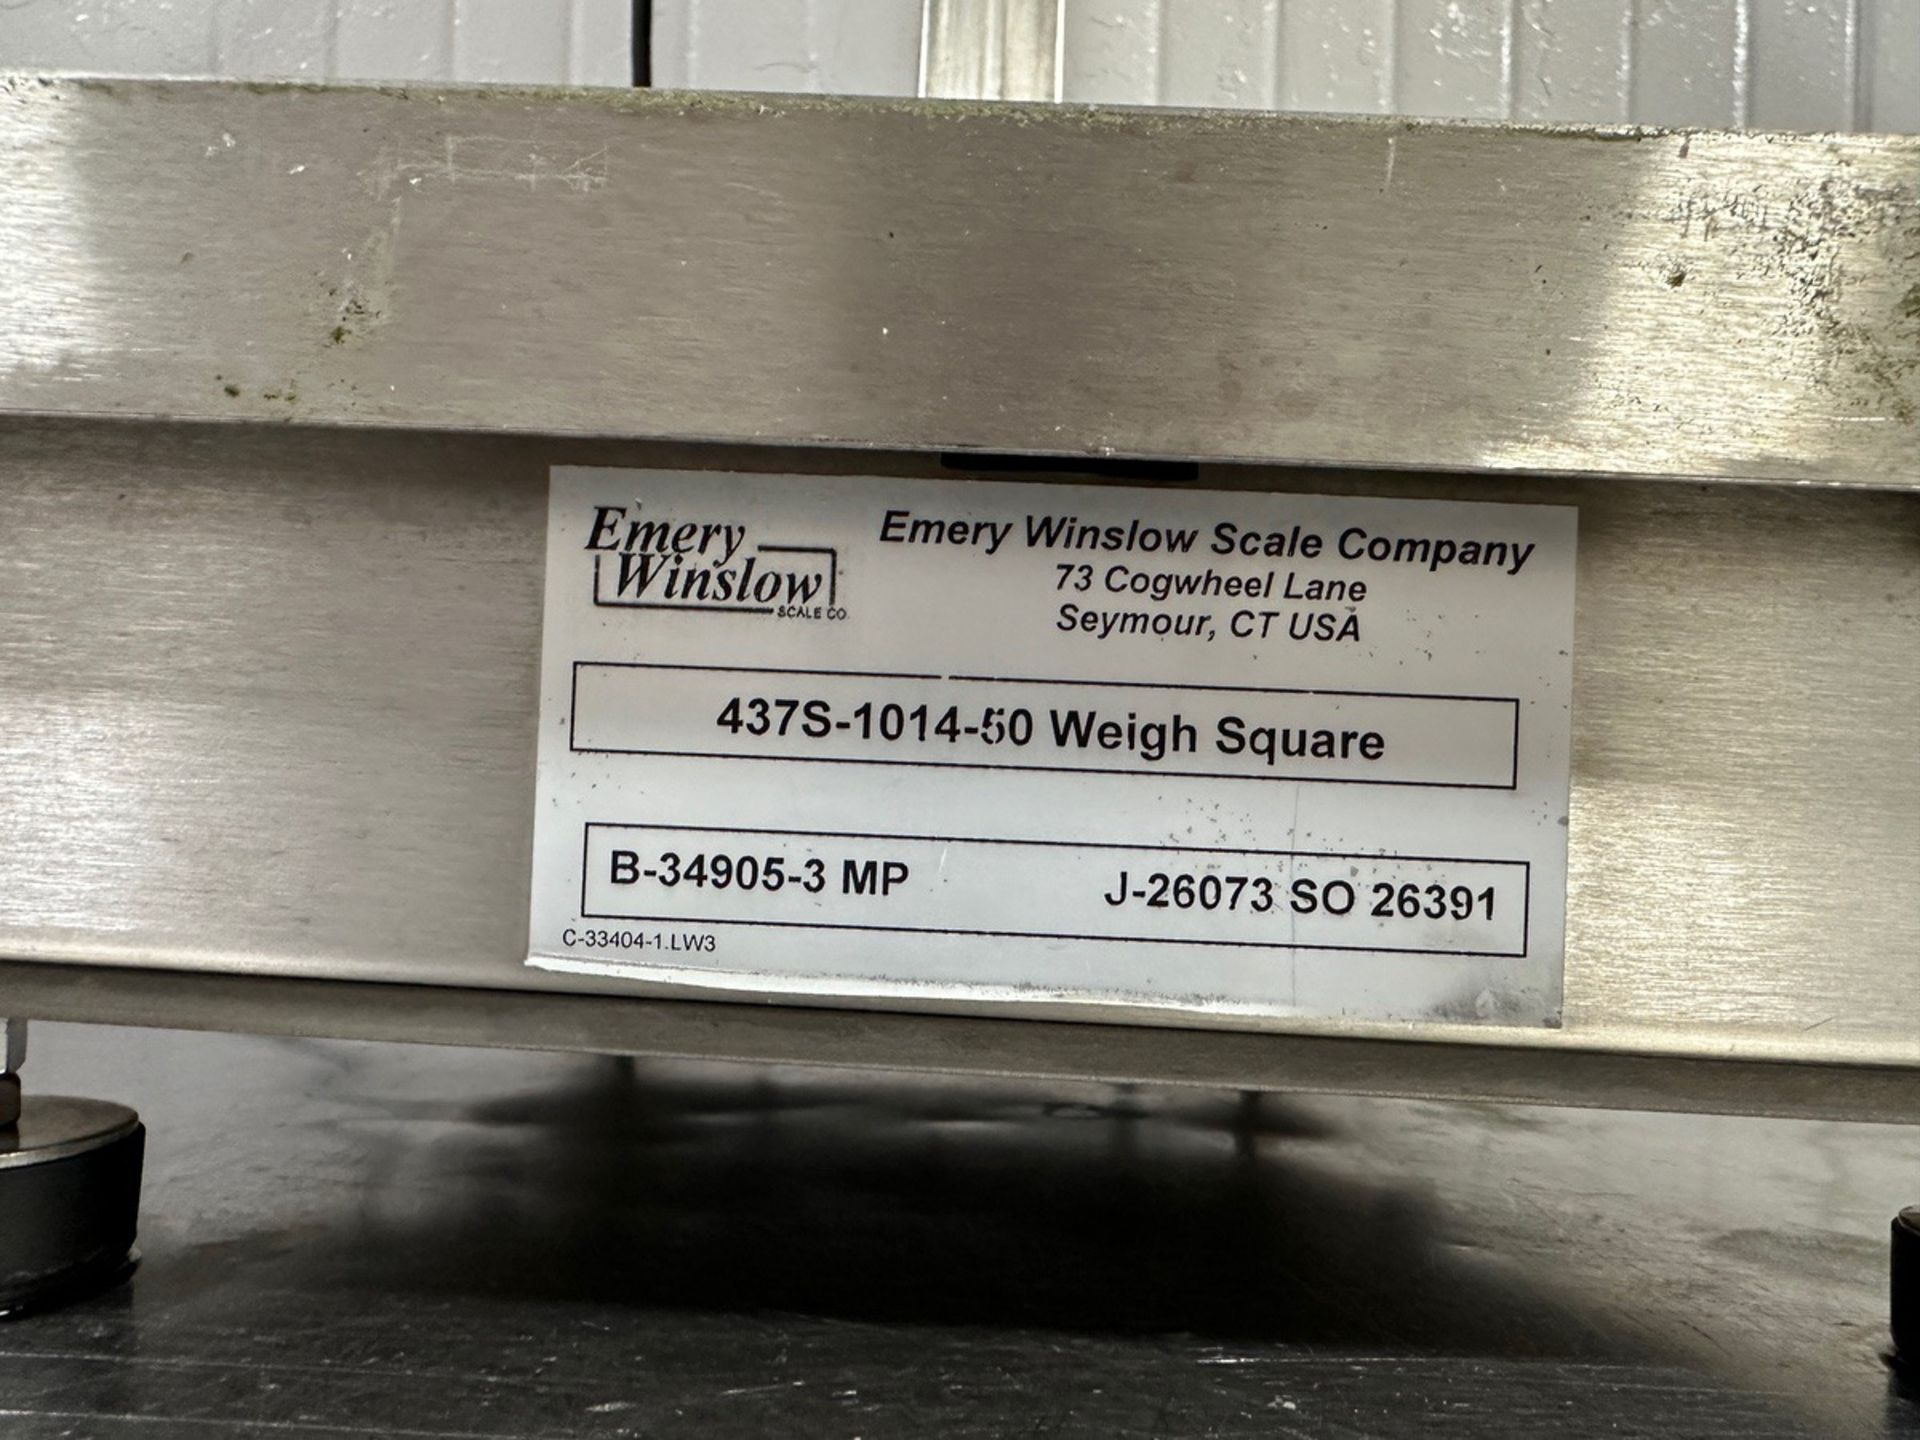 Emery Winslow Stainless Bench Top Scale, Model 7400E, 18"x18", 437S-1014-50 Weigh Square - Image 2 of 3